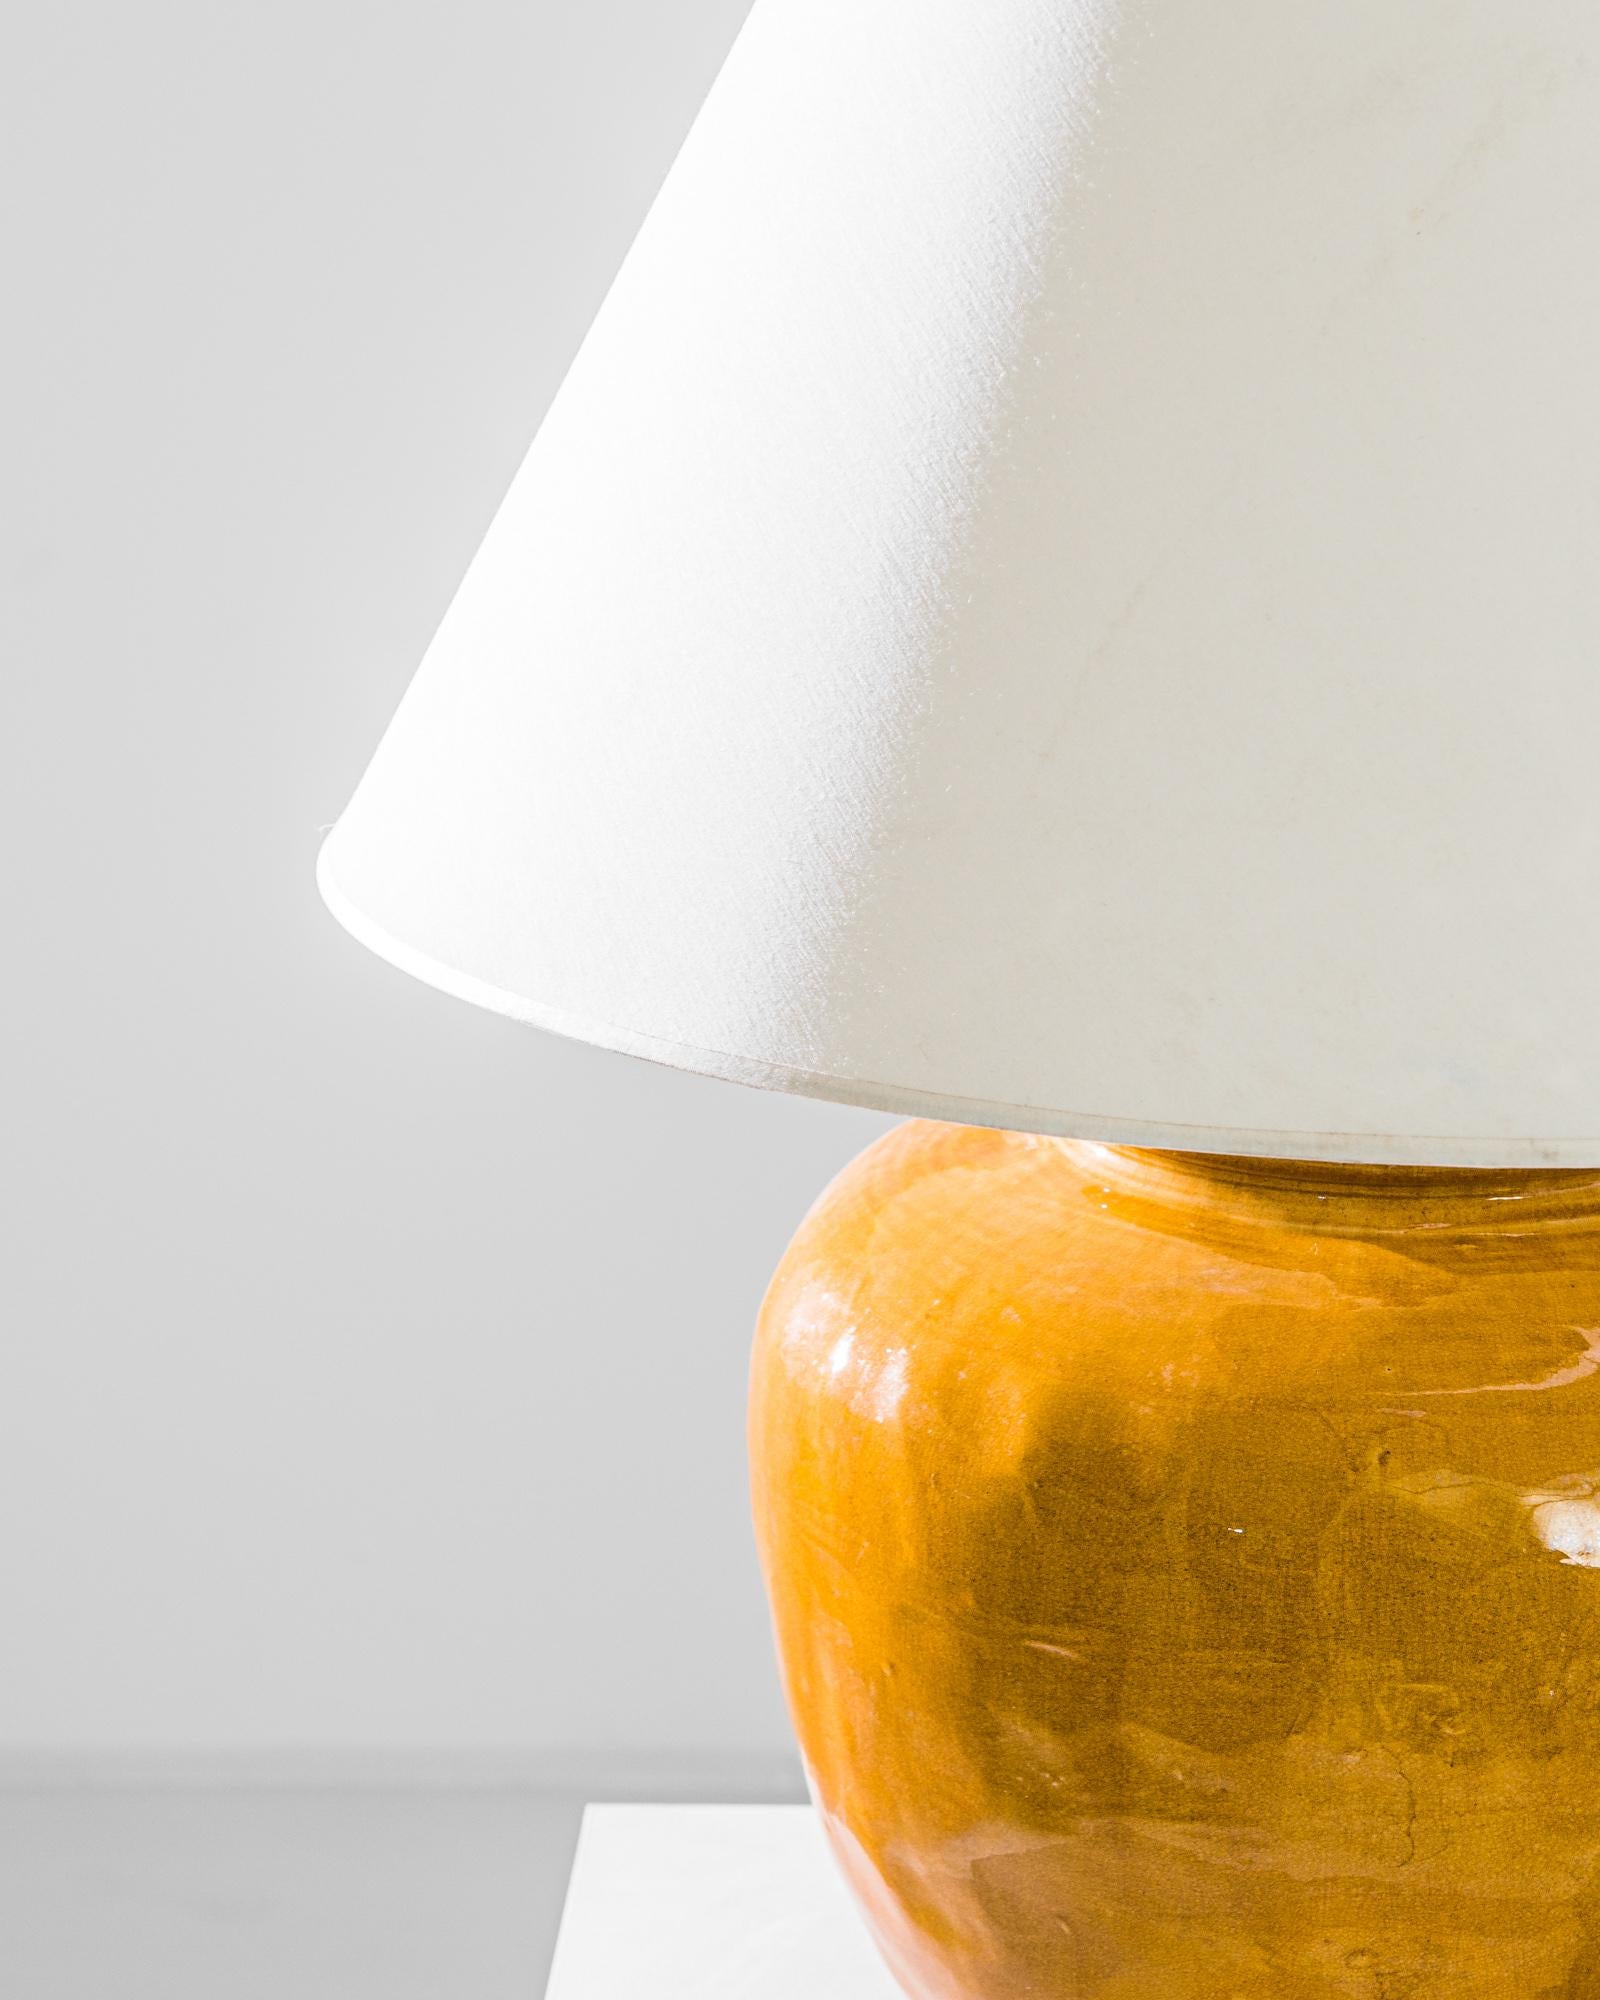 An extraordinary piece to inspire your collection. This vintage Chinese vase has been adapted into a beautiful table lamp. Polished brass meets the seductive warm ochre glaze, enlightening your space with an uncompromising contrast. Textured glazes,